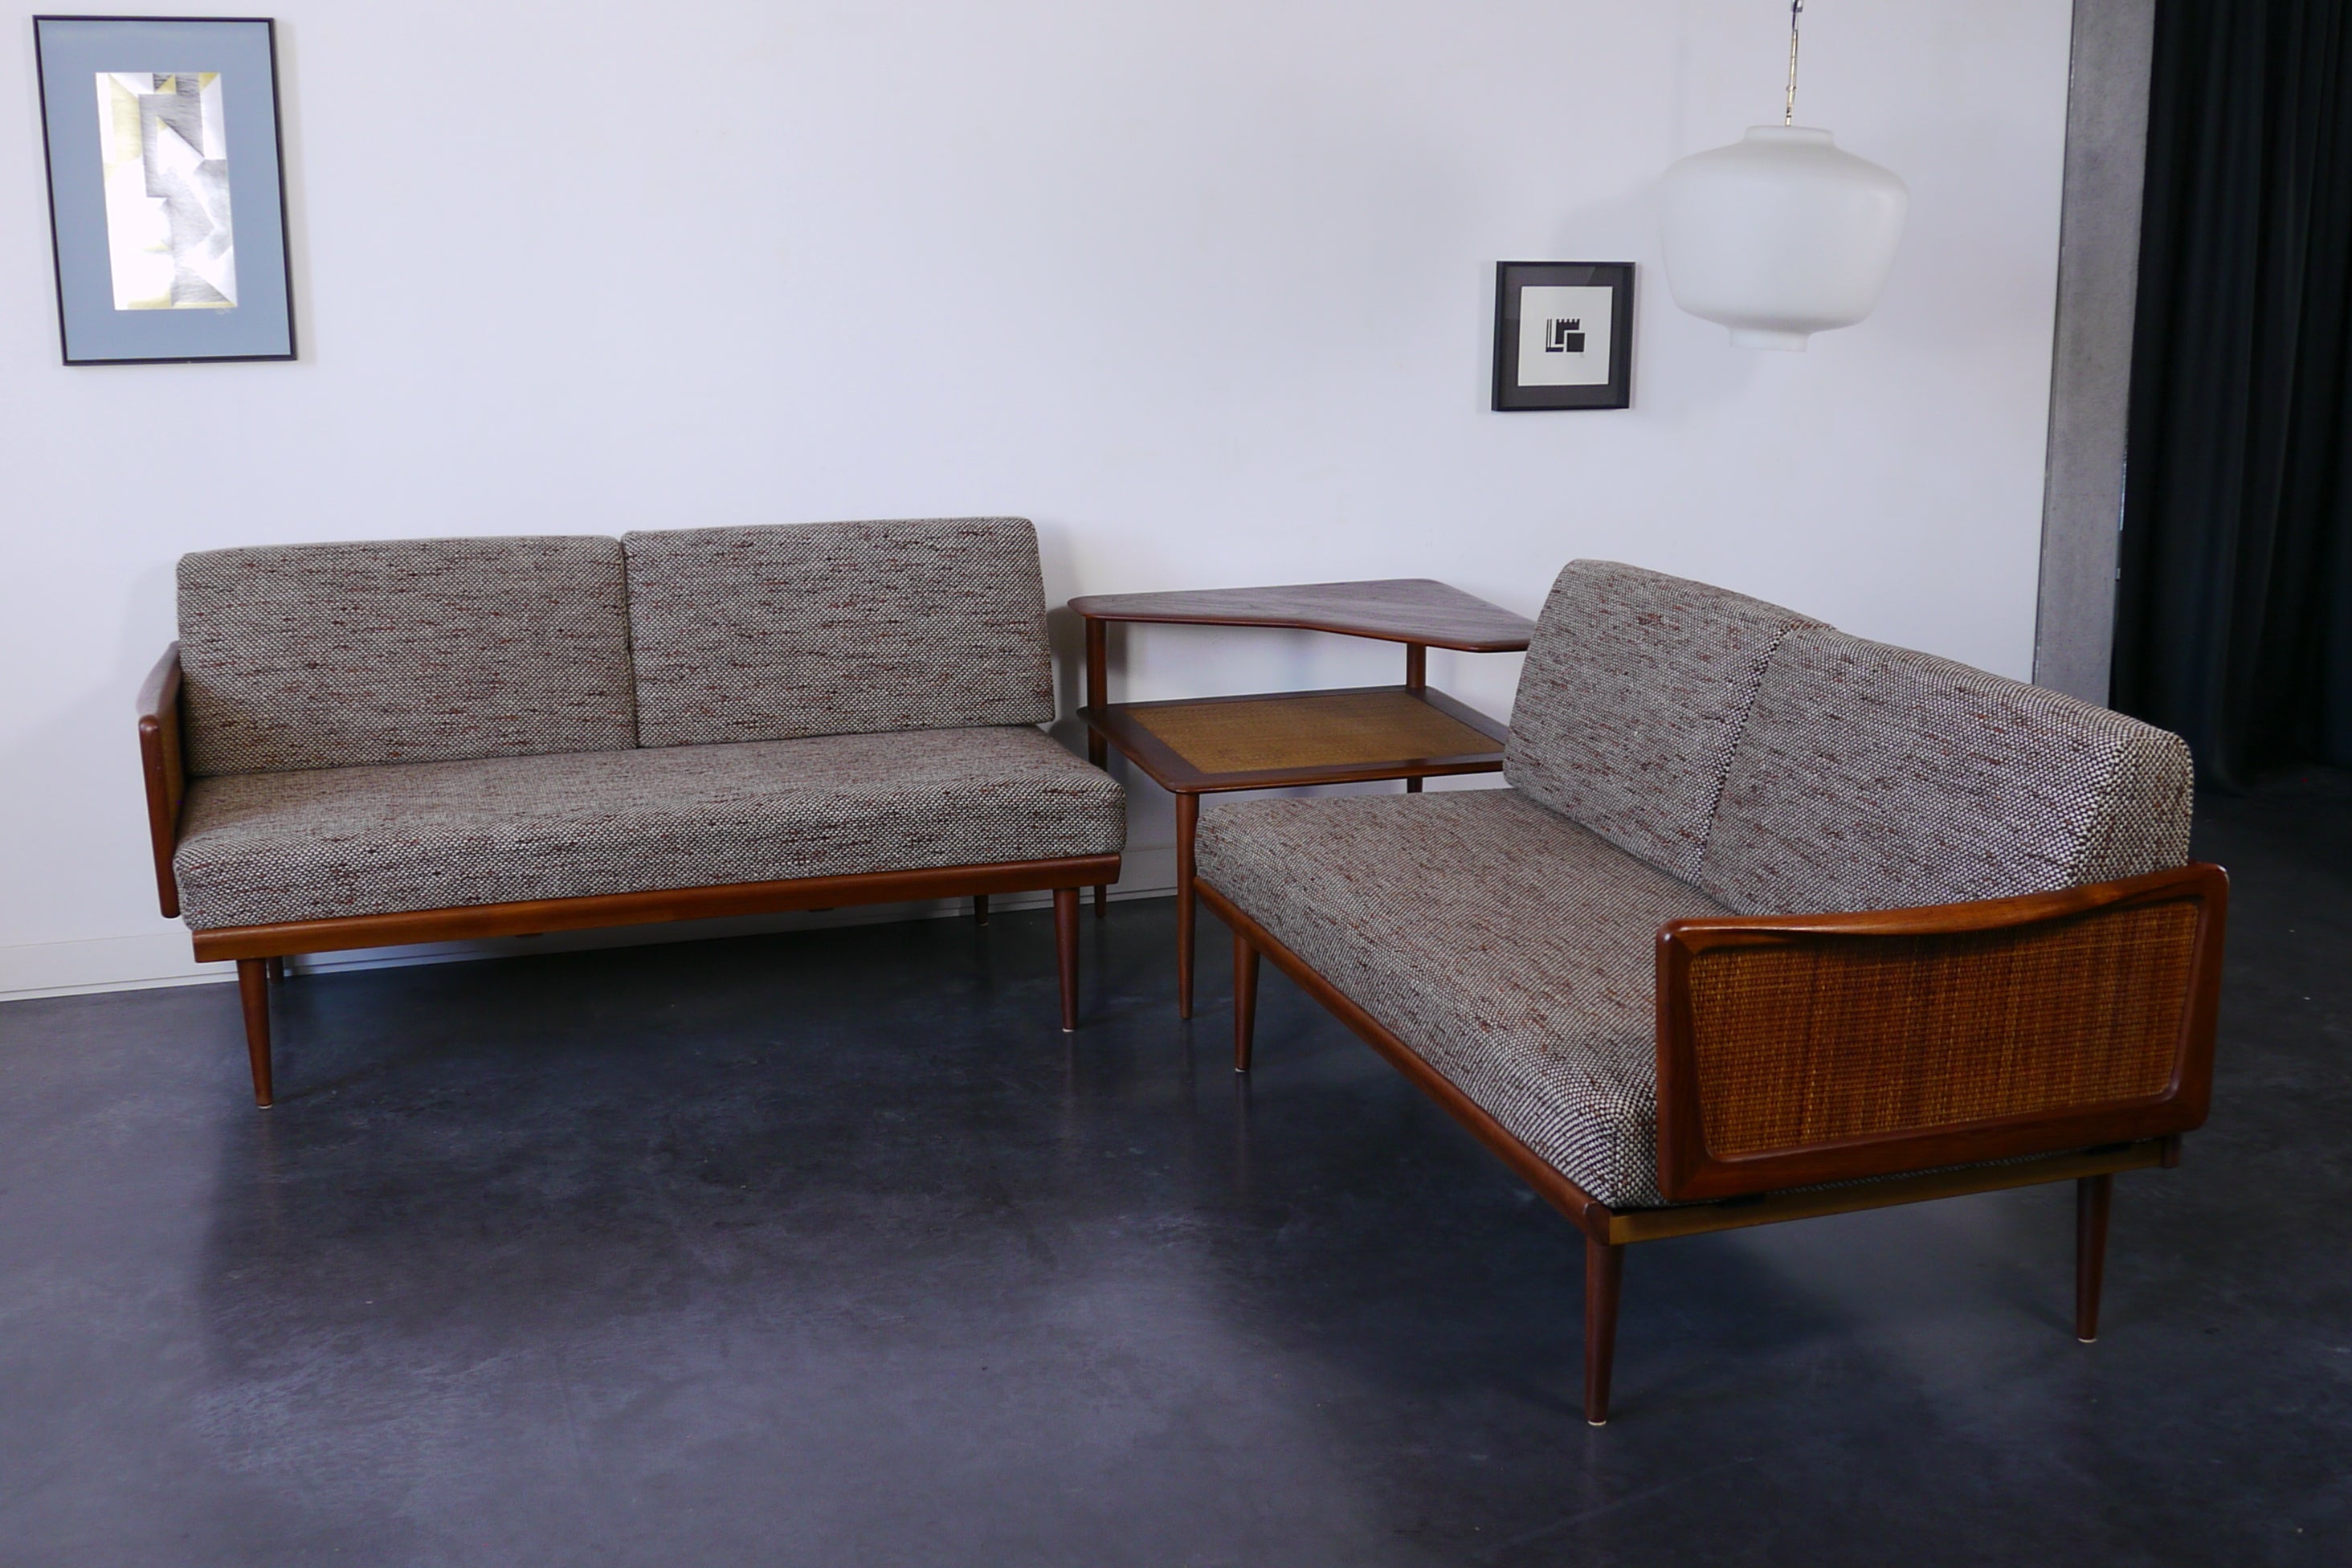 This modular living room set was designed by the Danish architects Peter Hvidt & Orla Mølgaard Nielsen. It was produced in Denmark by France & Daverkosen during the 1950's. The set includes two modular 2-seater sofa and a corner coffee table model